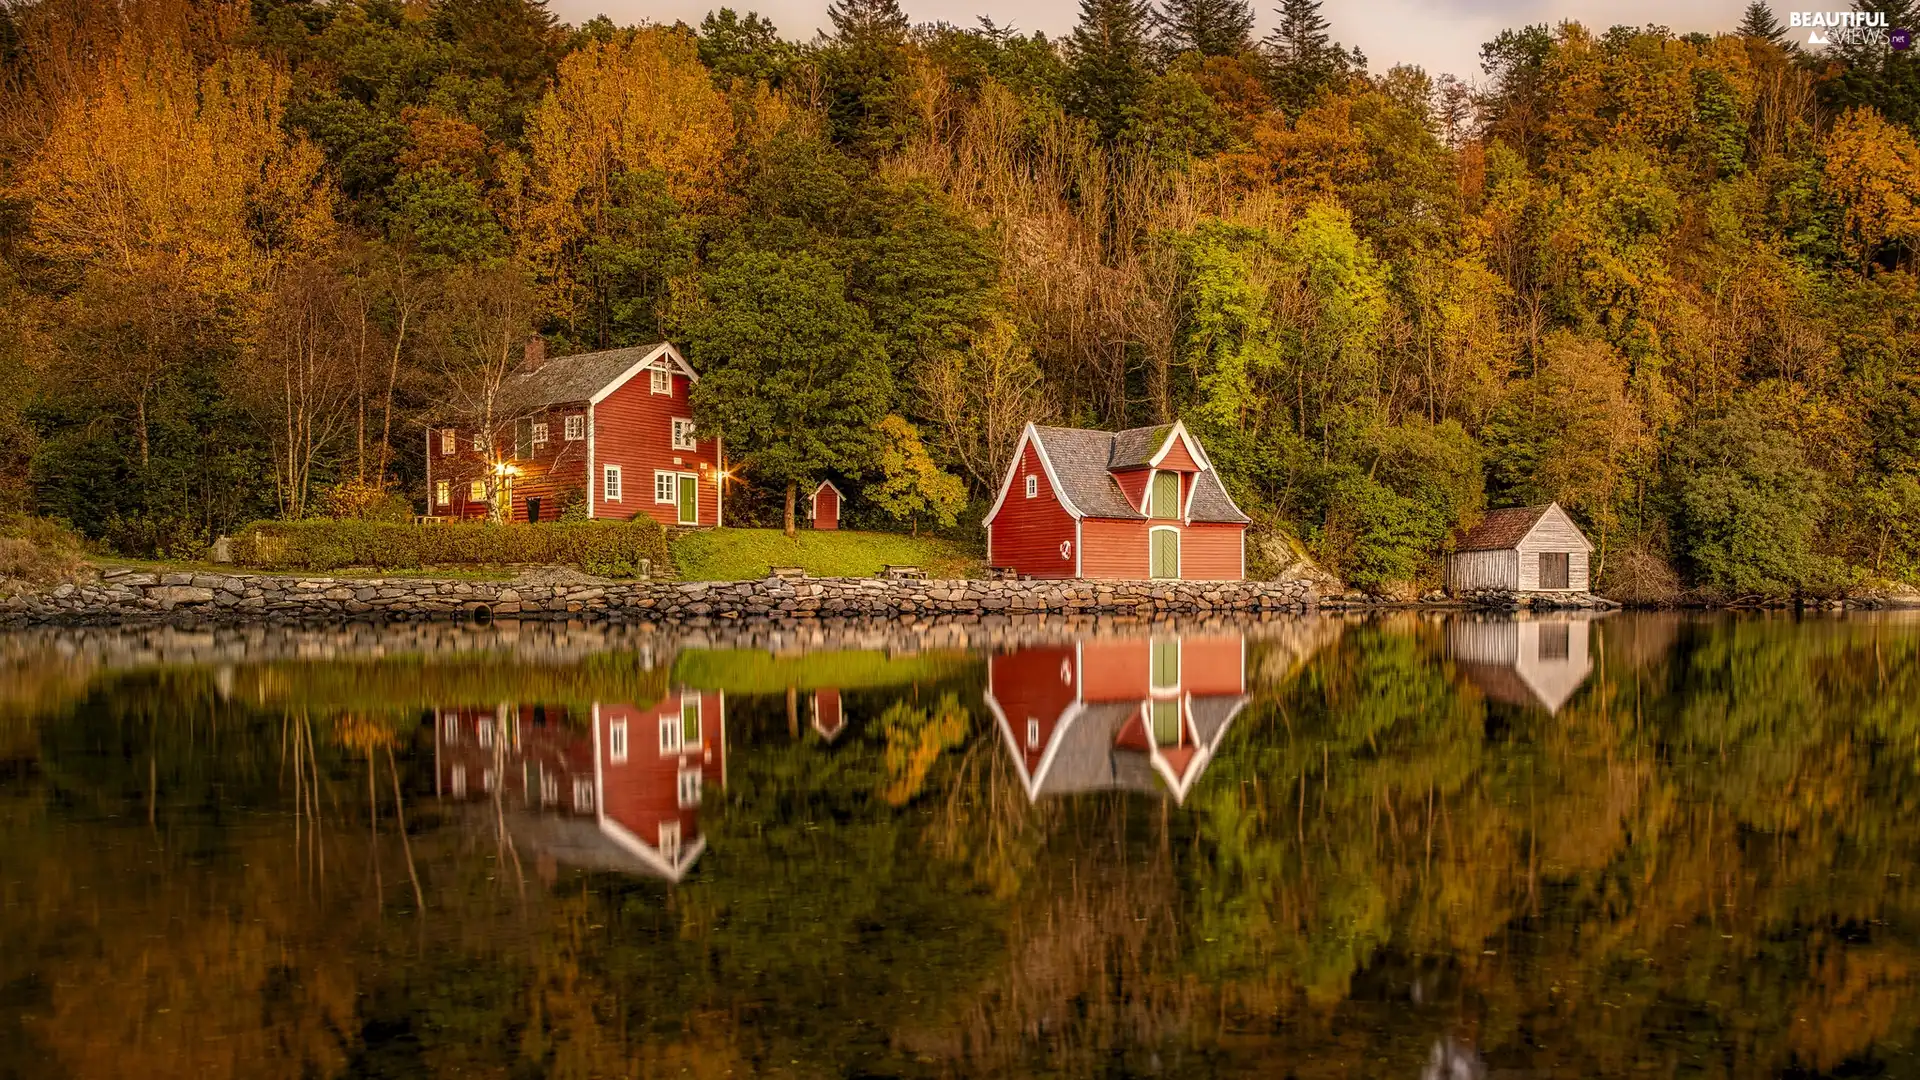 viewes, color, lake, trees, autumn, Houses, reflection